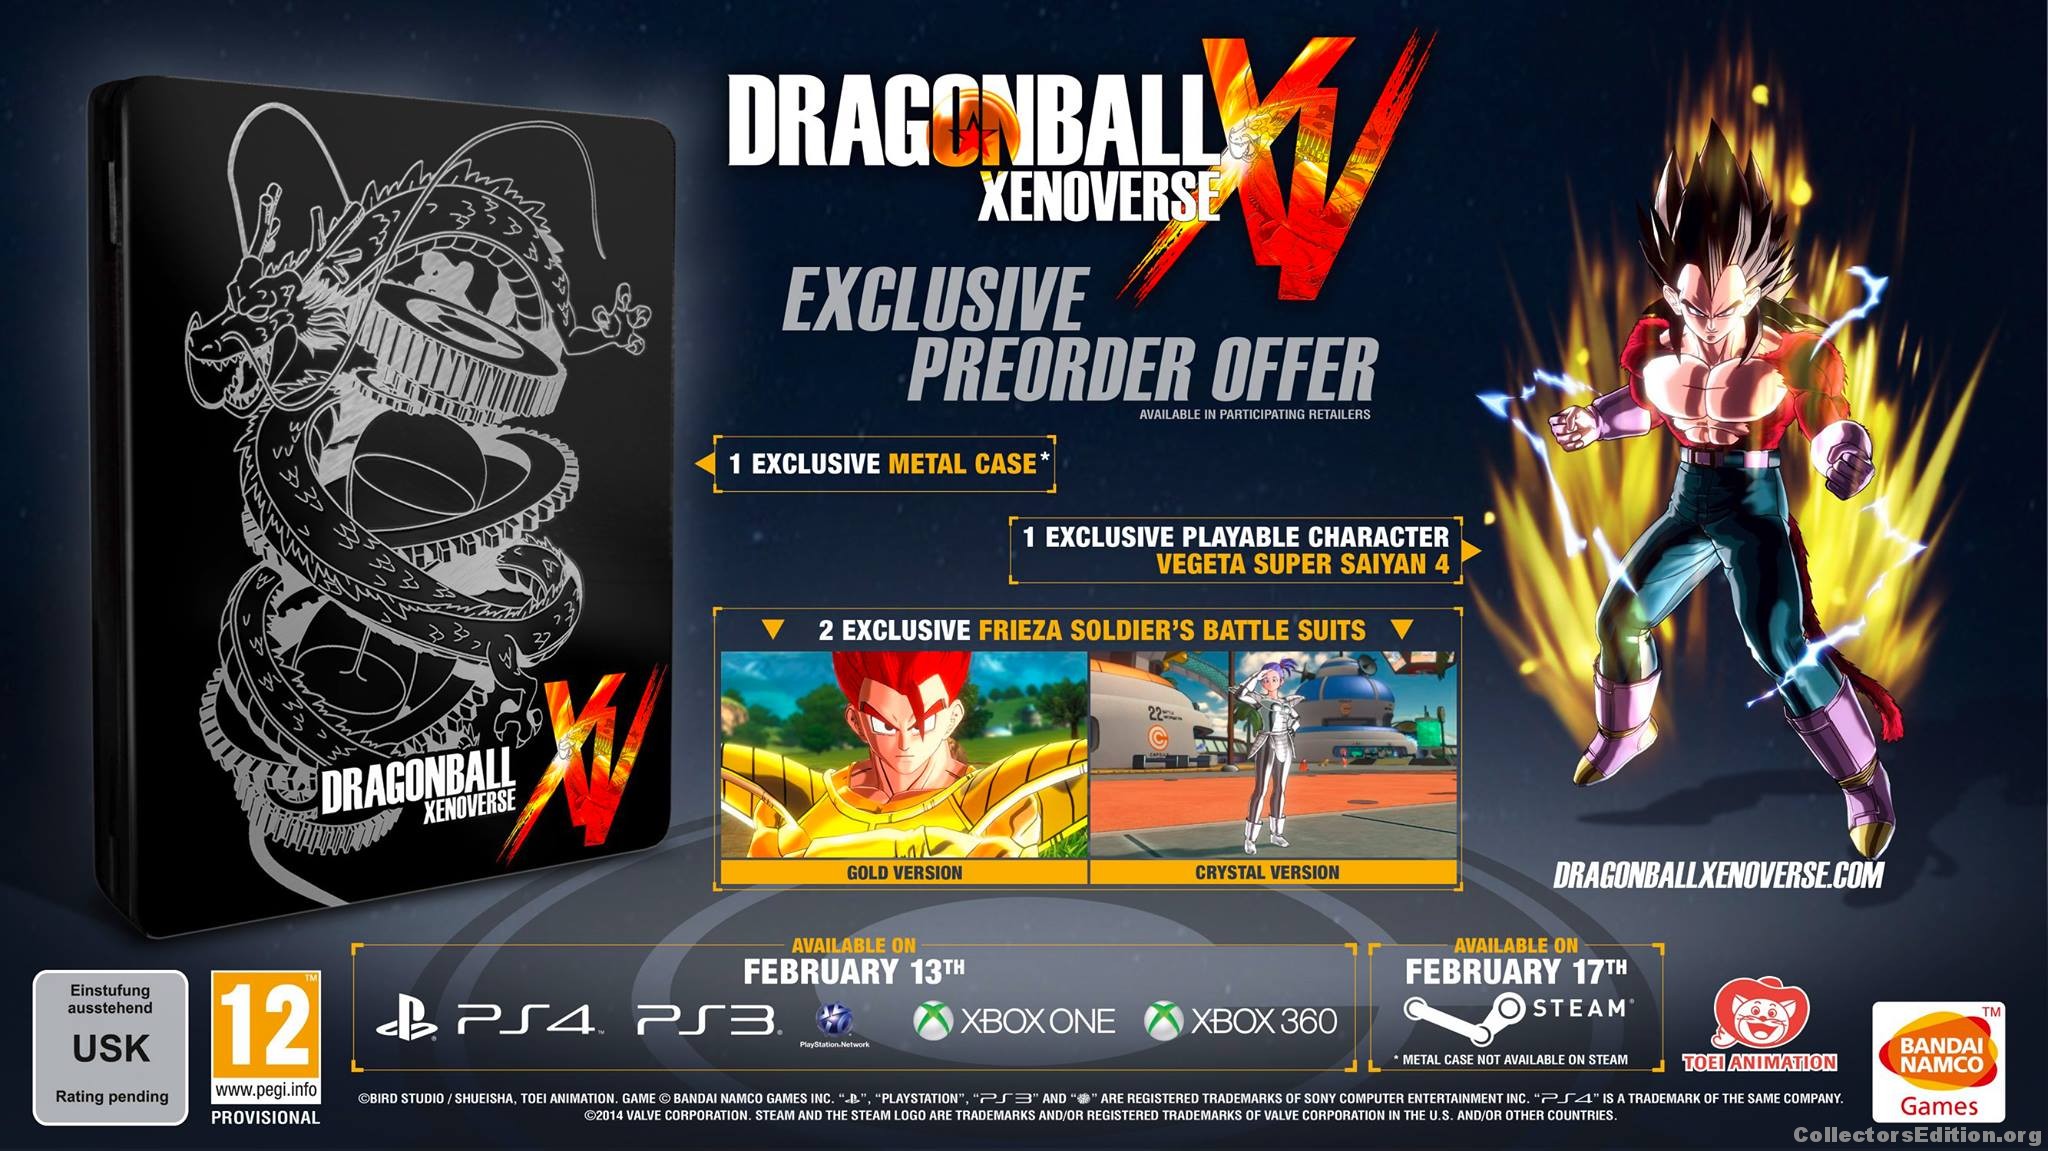 Dragon Ball: Xenoverse (Trunks' Travel Edition) for PlayStation 3